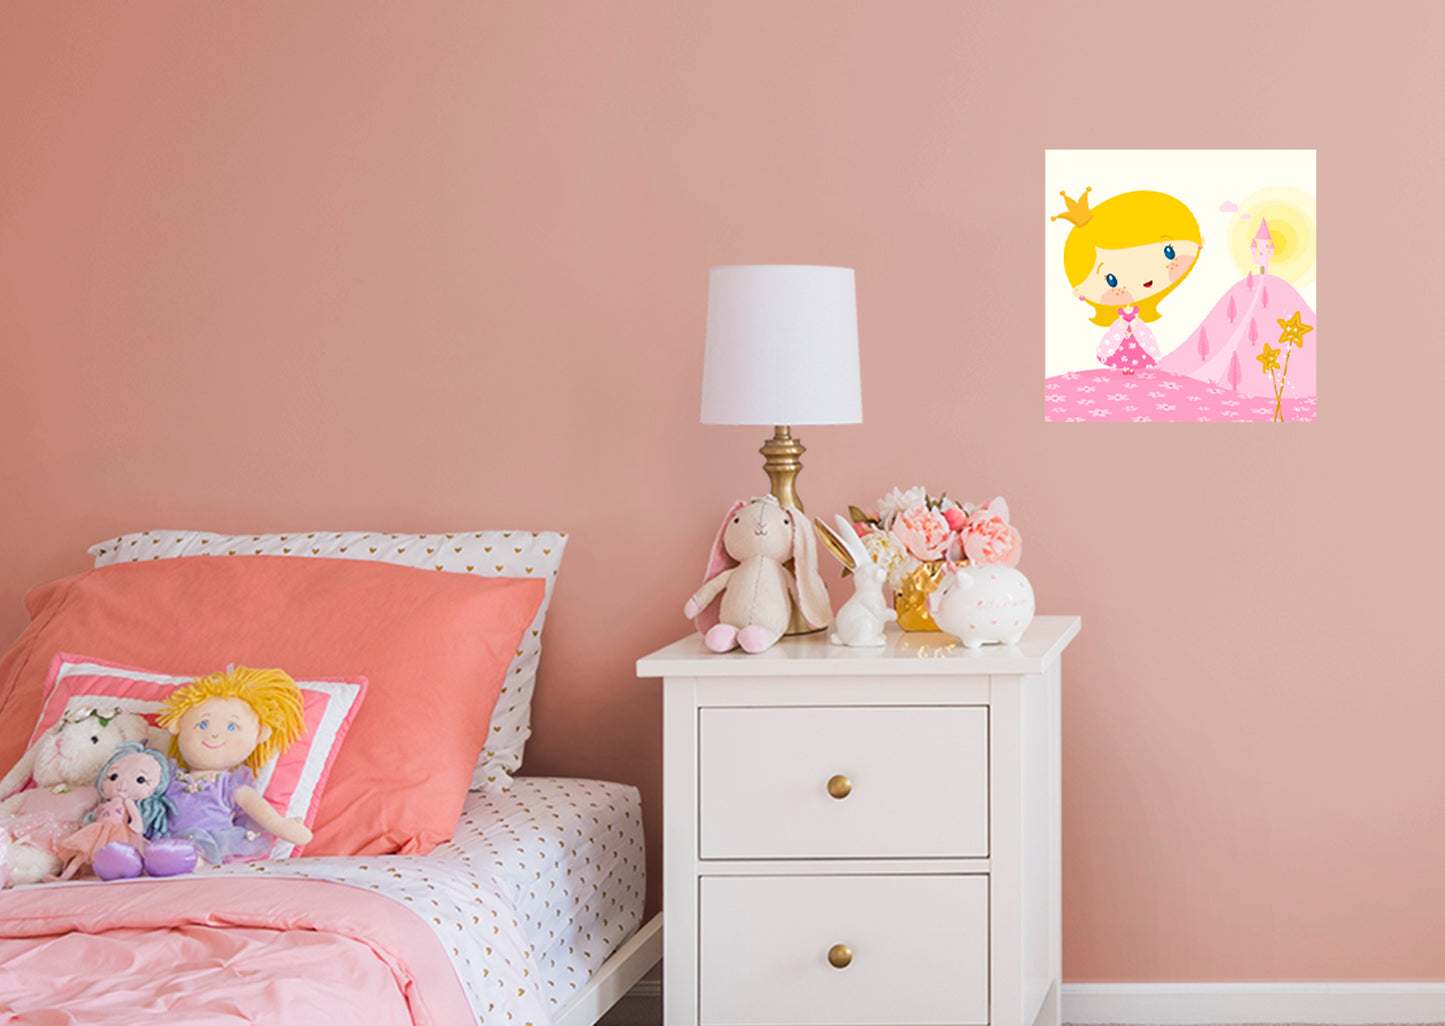 Nursery:  Pink Land Mural        -   Removable Wall   Adhesive Decal